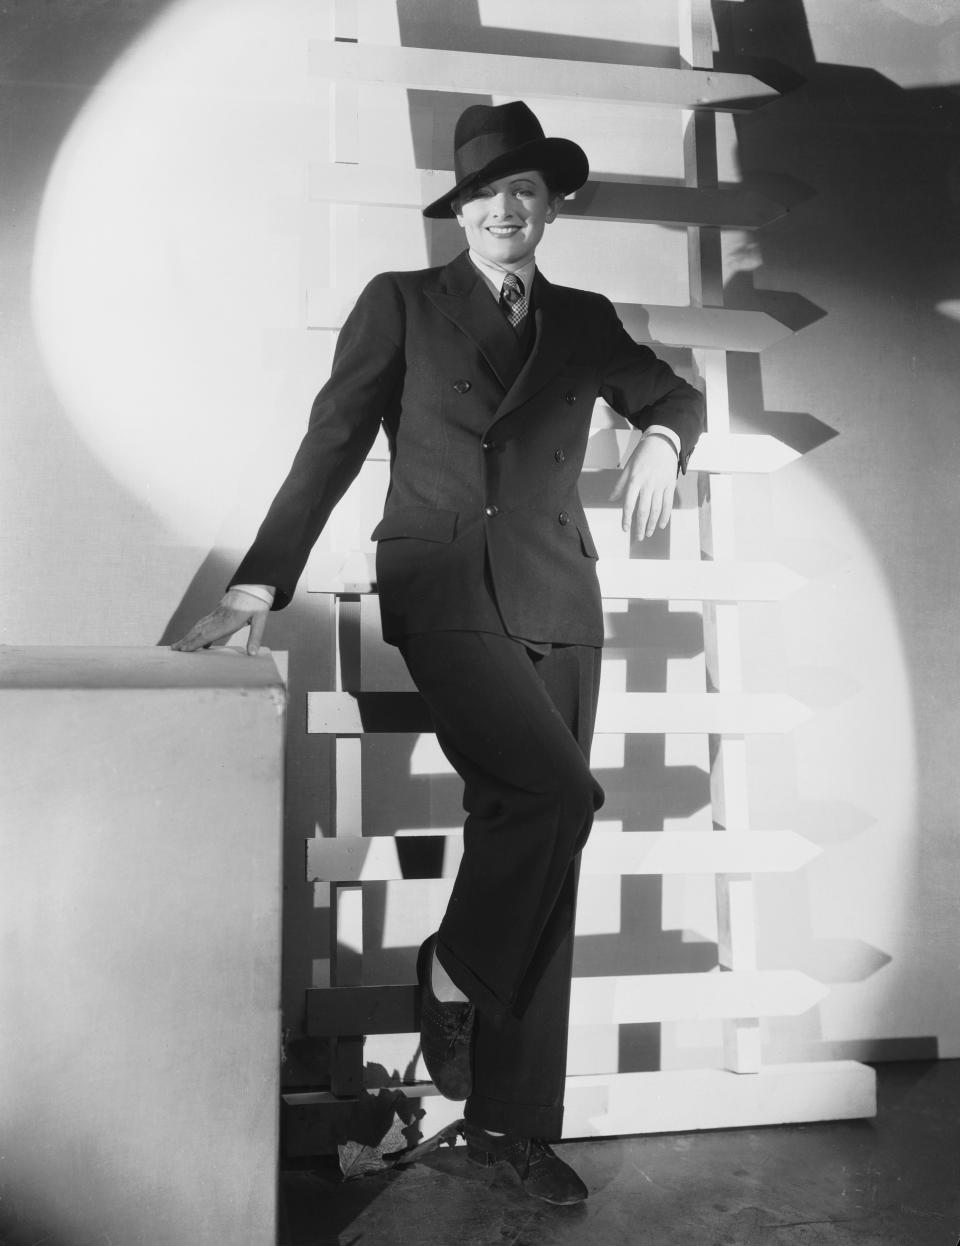 Loy wears a man's suit and hat for a publicity photograph before the release of "The Thin Man," in April 1934.